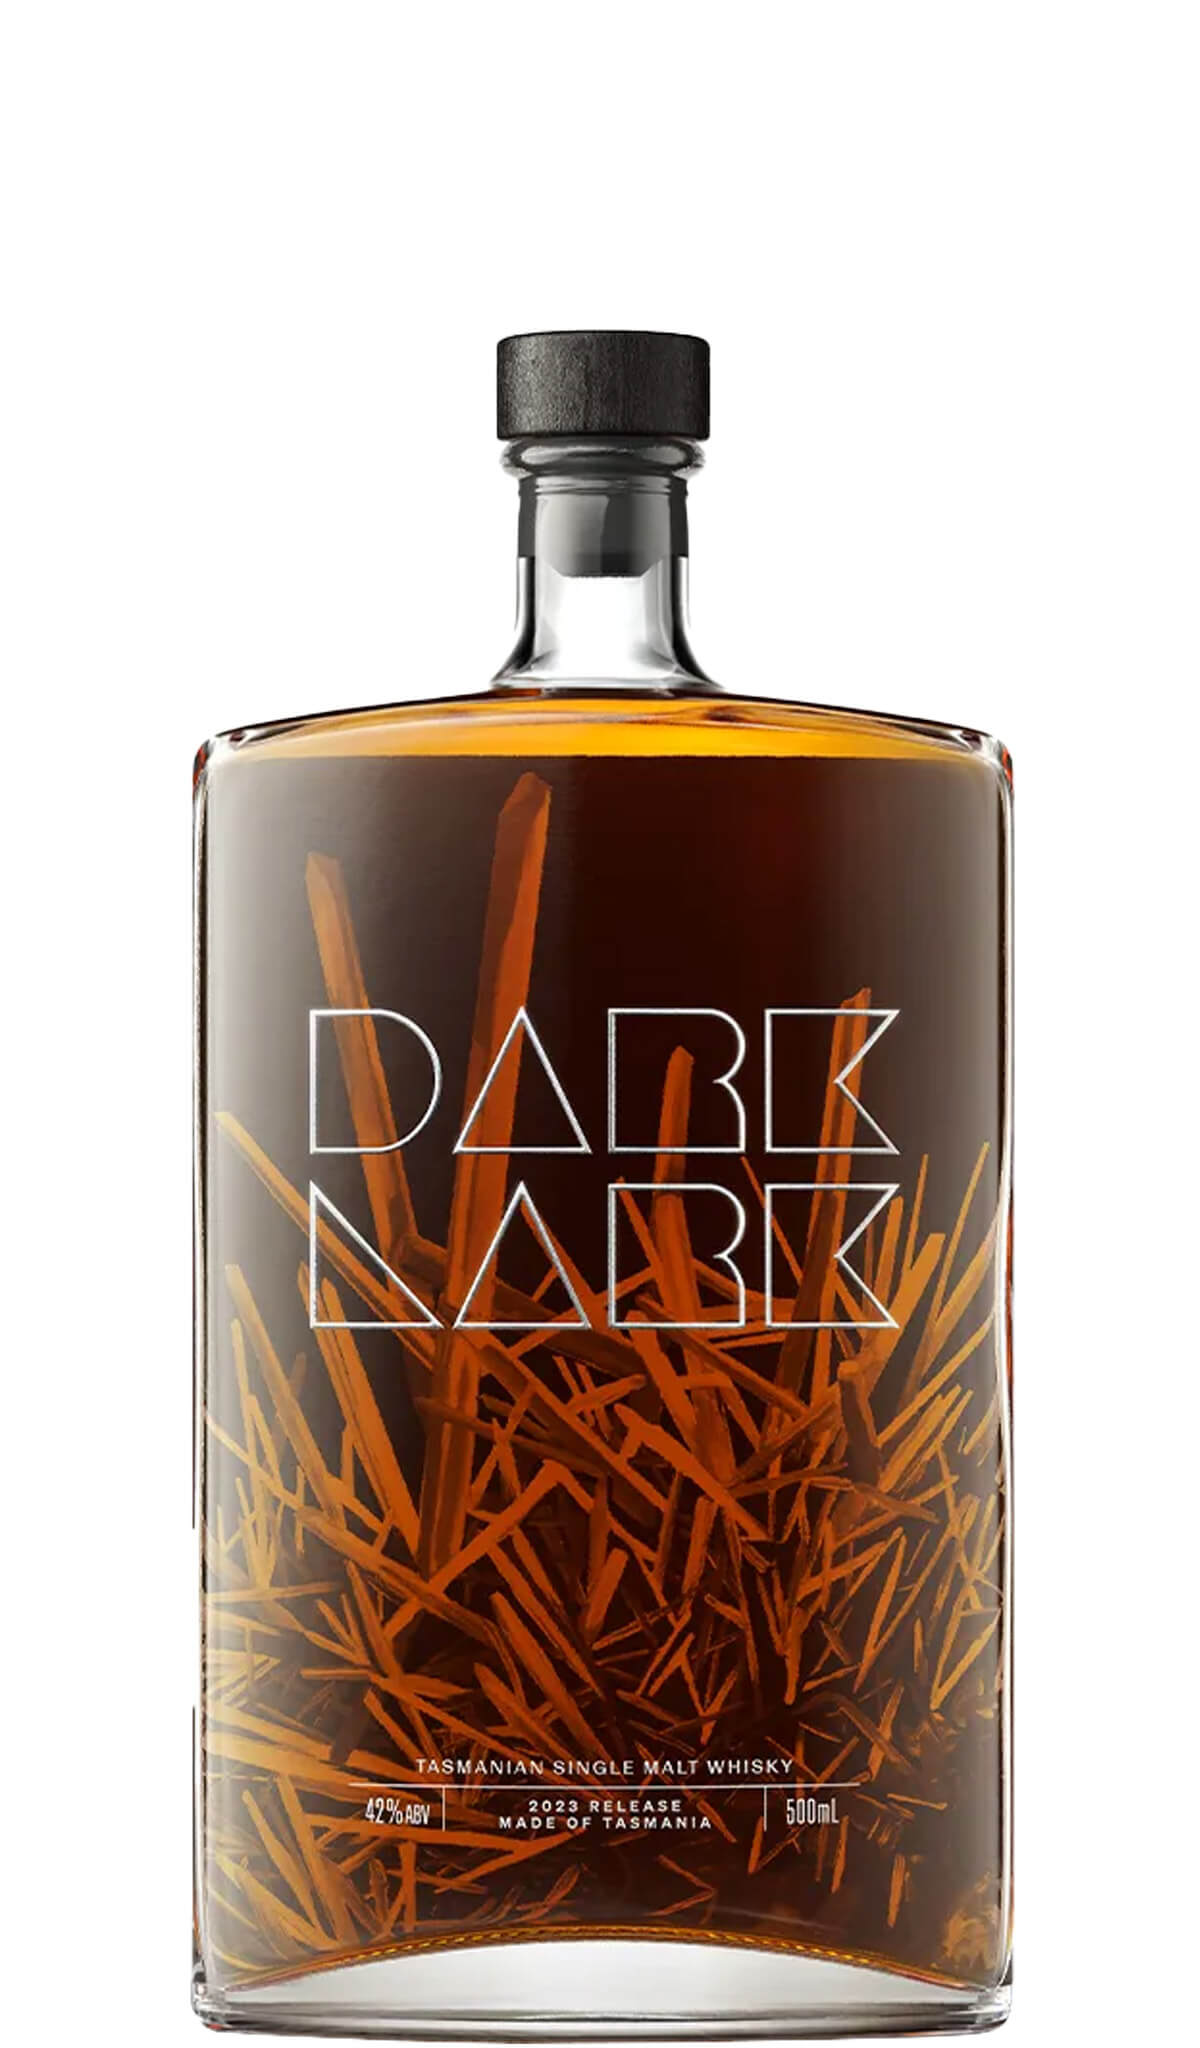 Find out more or buy Lark Dark Single Malt 2023 Release 500ml (Tasmania) online at Wine Sellers Direct - Australia’s independent liquor specialists.